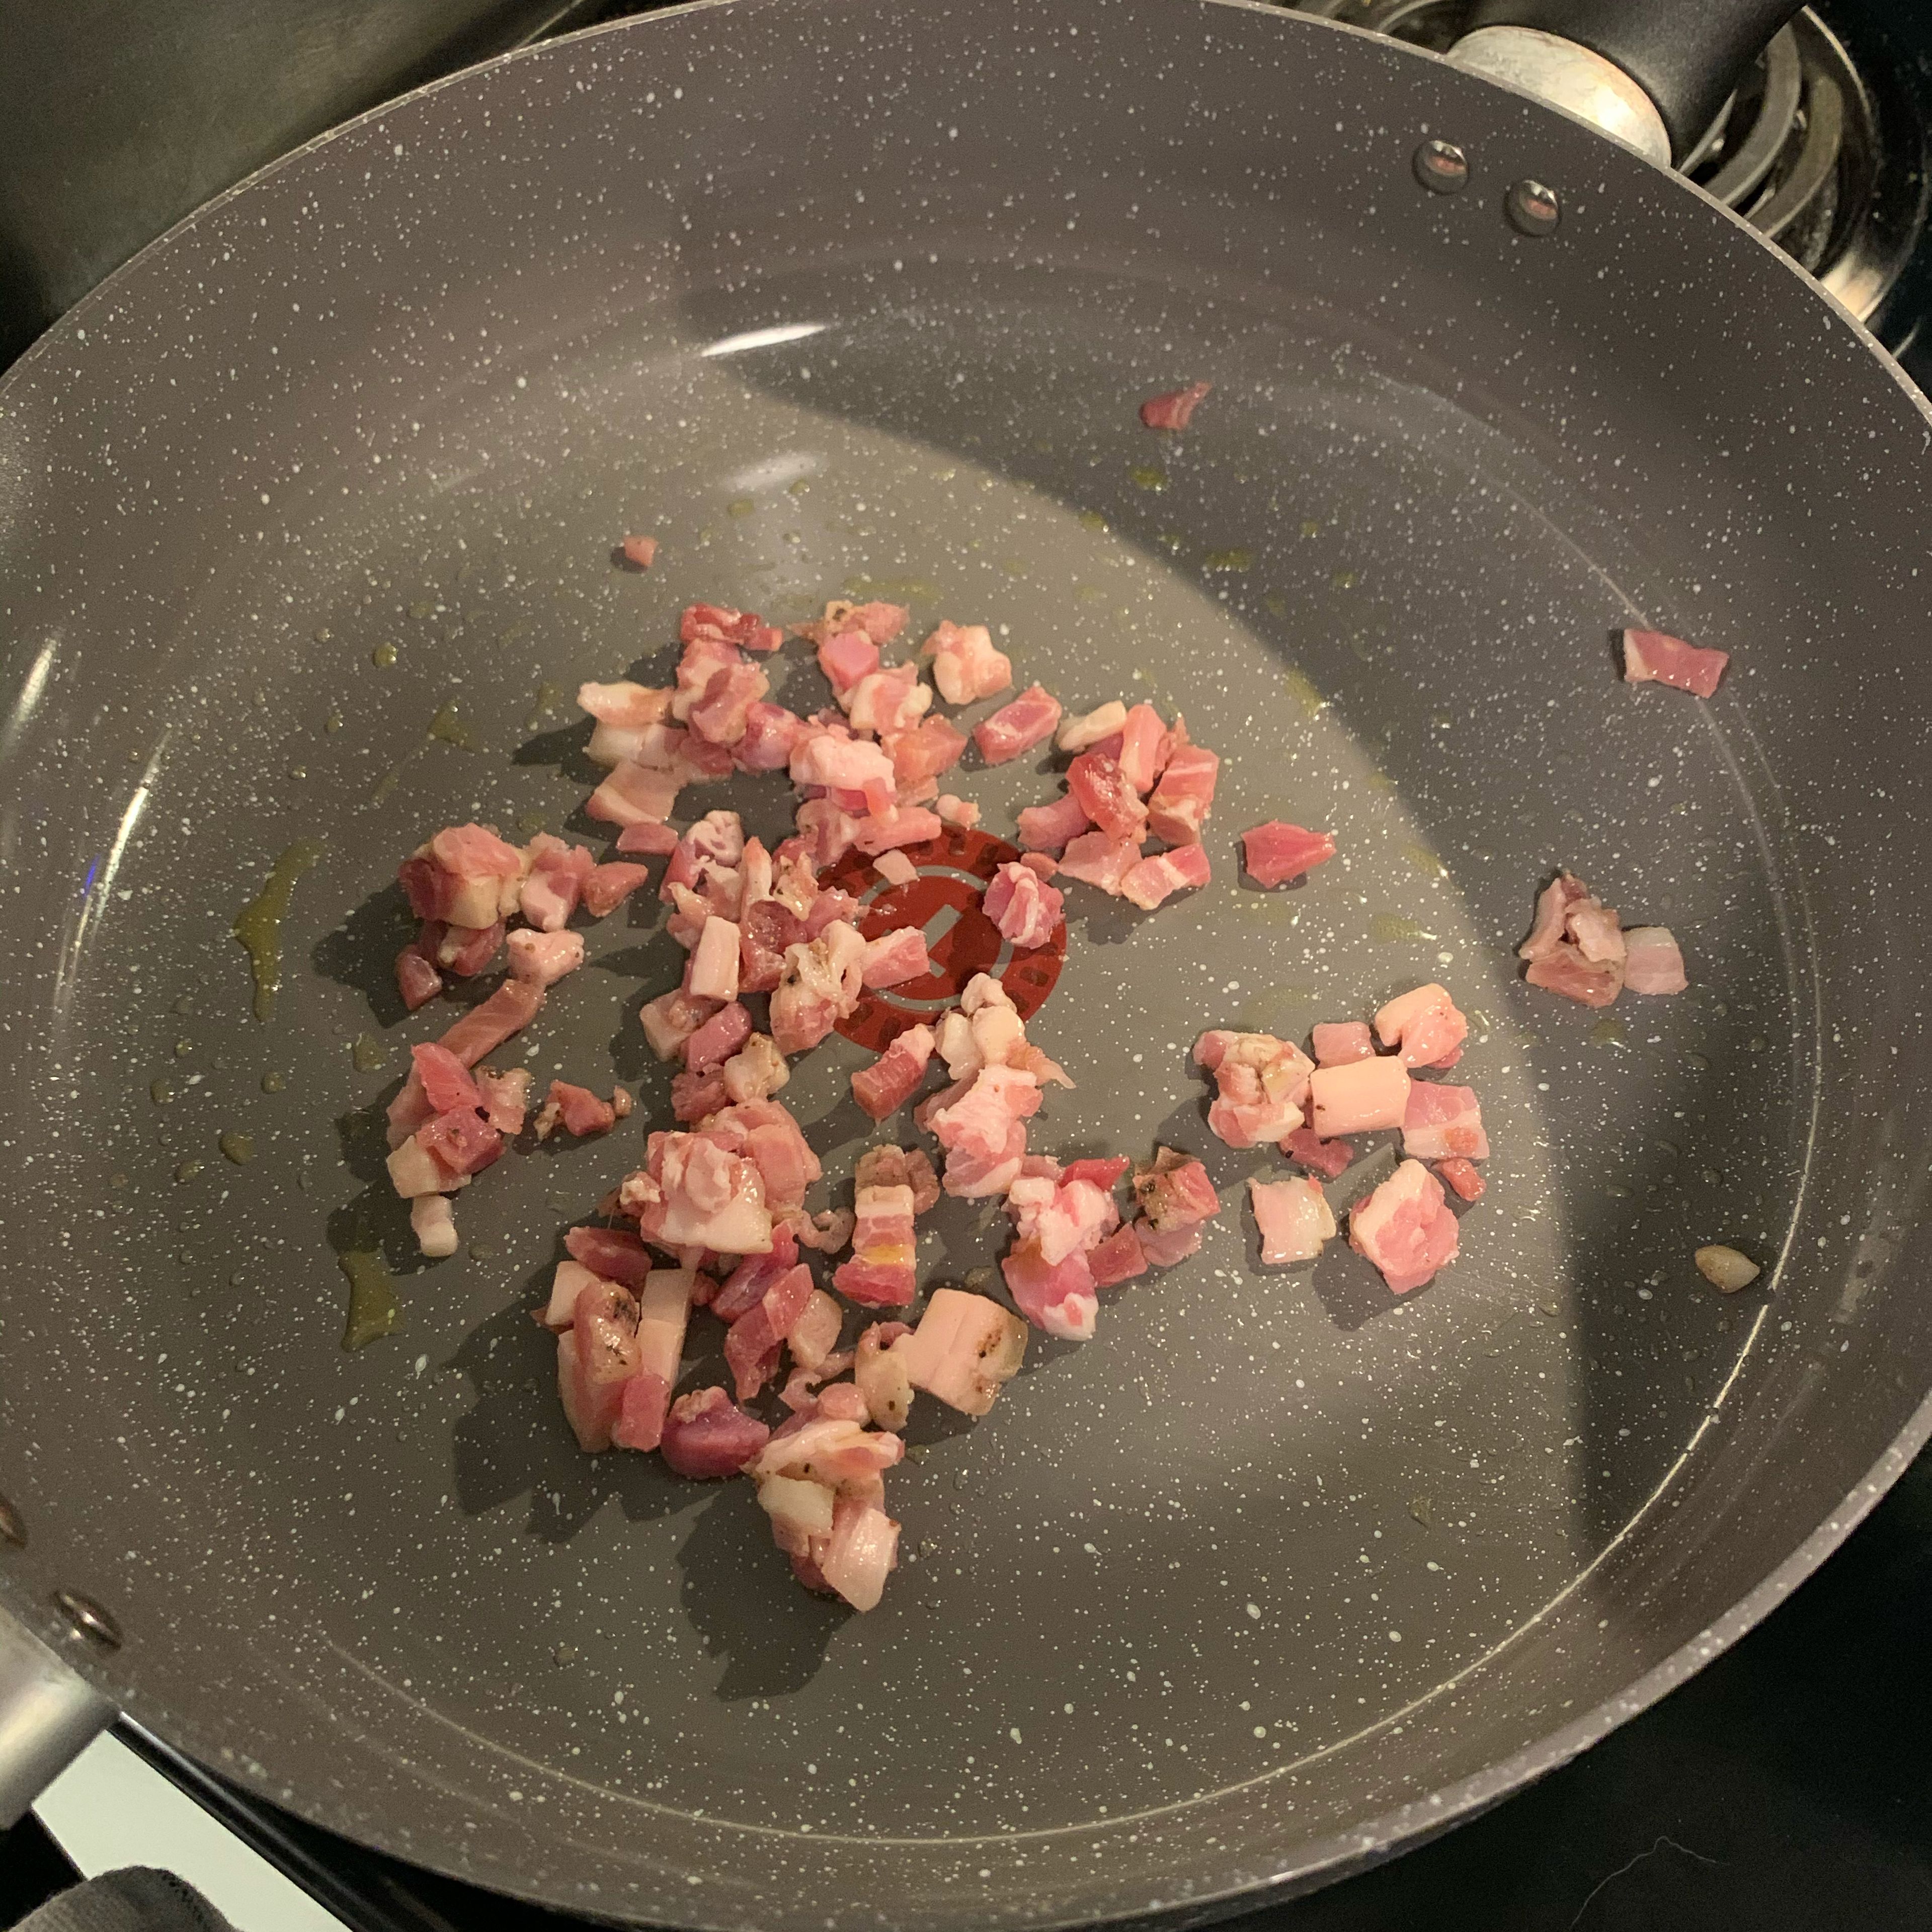 Add pancetta and a little olive oil to pan over medium heat. Cook until brown and crispy. You’ll want to cover the pan halfway with the lid to stop oils from splashing everywhere. My deli had a 2 serving pack available.